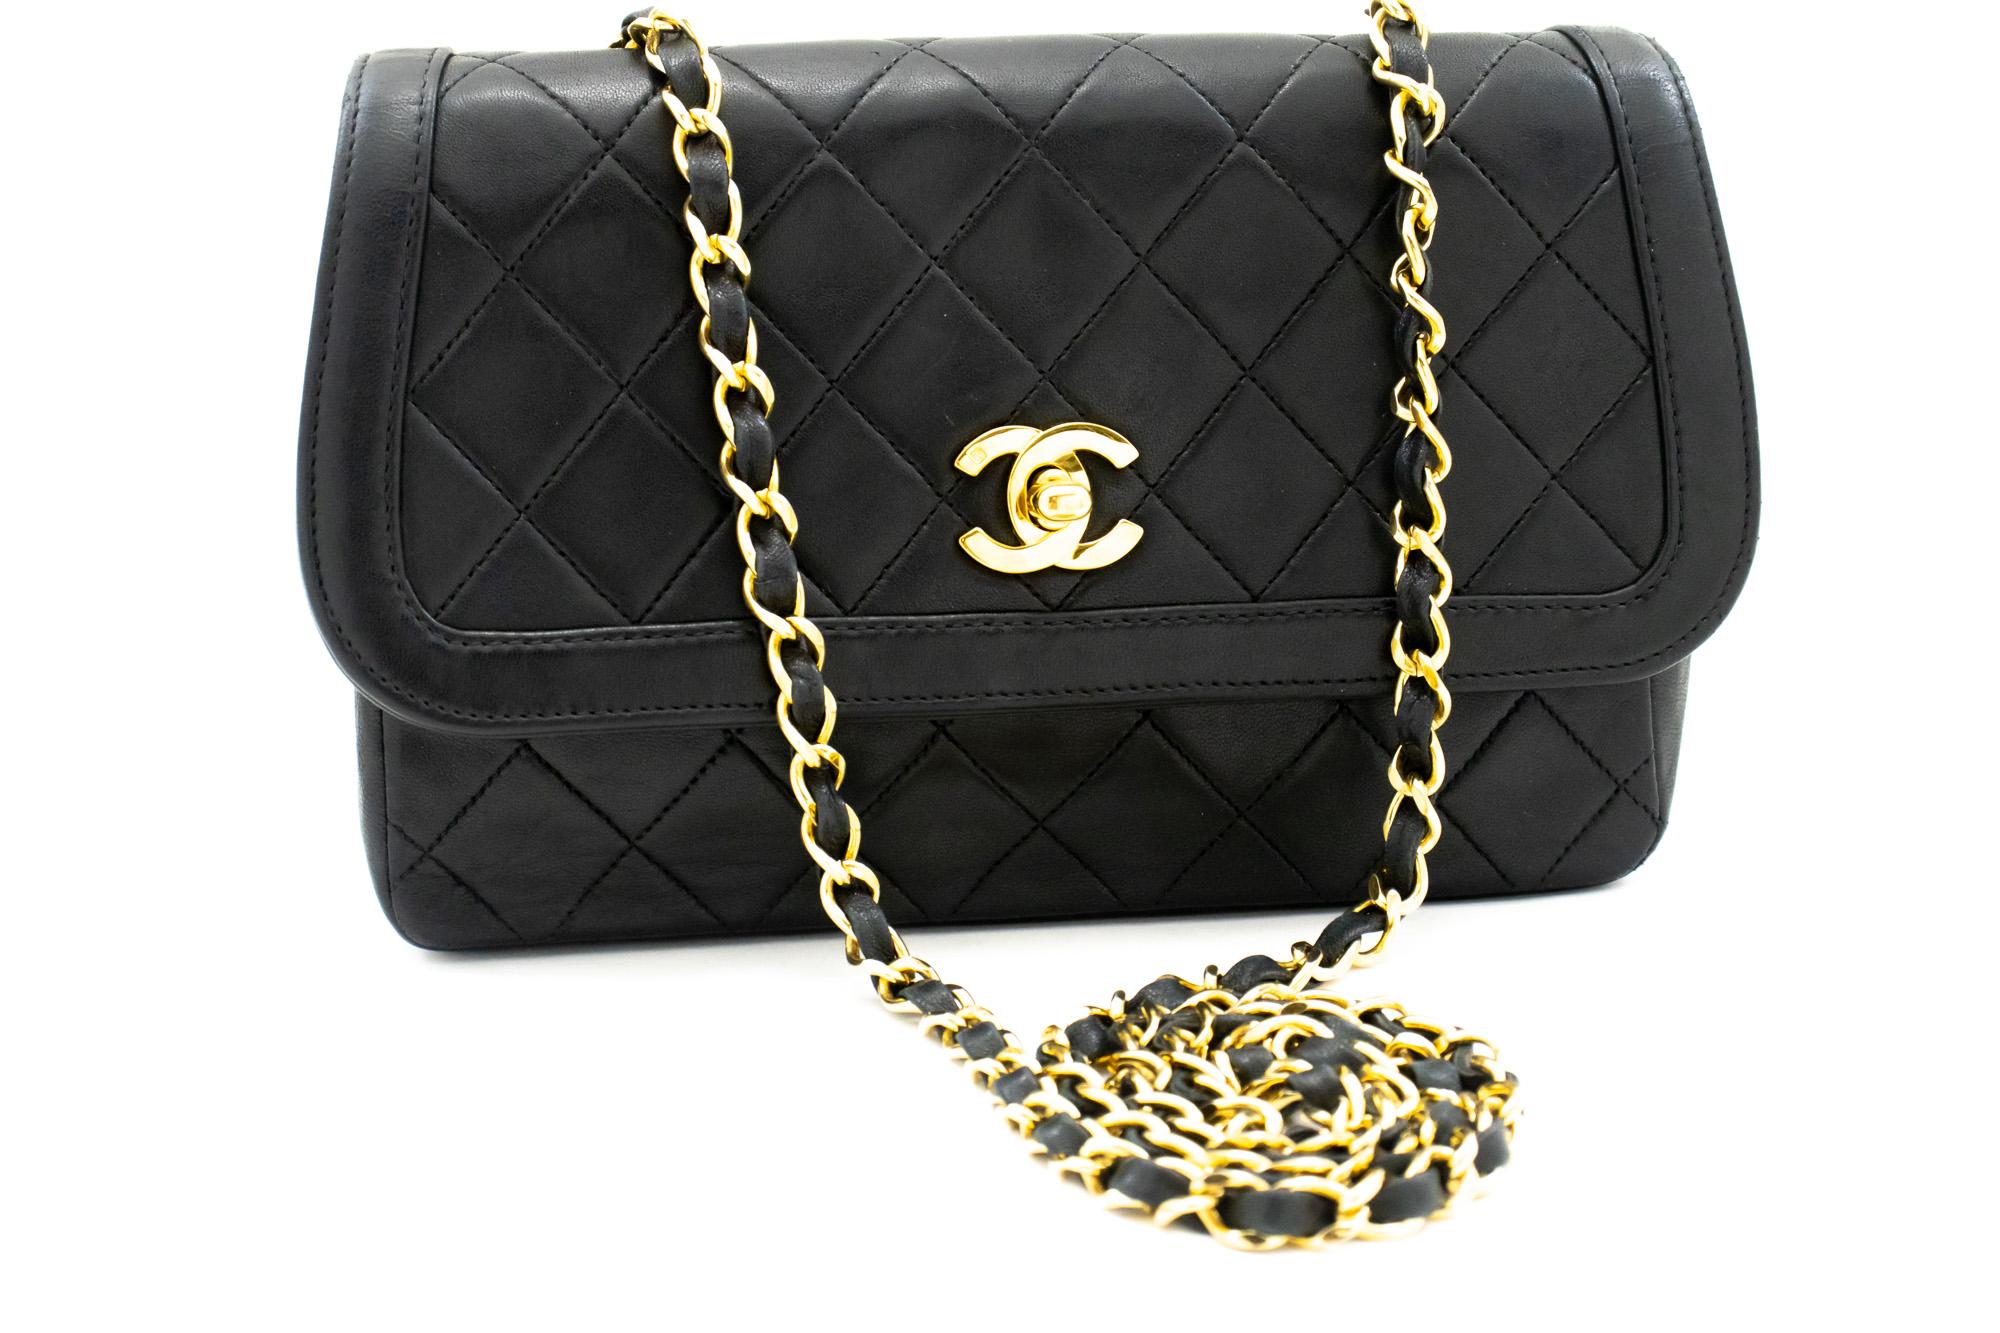 An authentic CHANEL Vintage Classic Small Chain Shoulder Bag Single Flap Quilt. The color is Black. The outside material is Leather. The pattern is Solid. This item is Vintage / Classic. The year of manufacture would be 1989-1991.
Conditions &